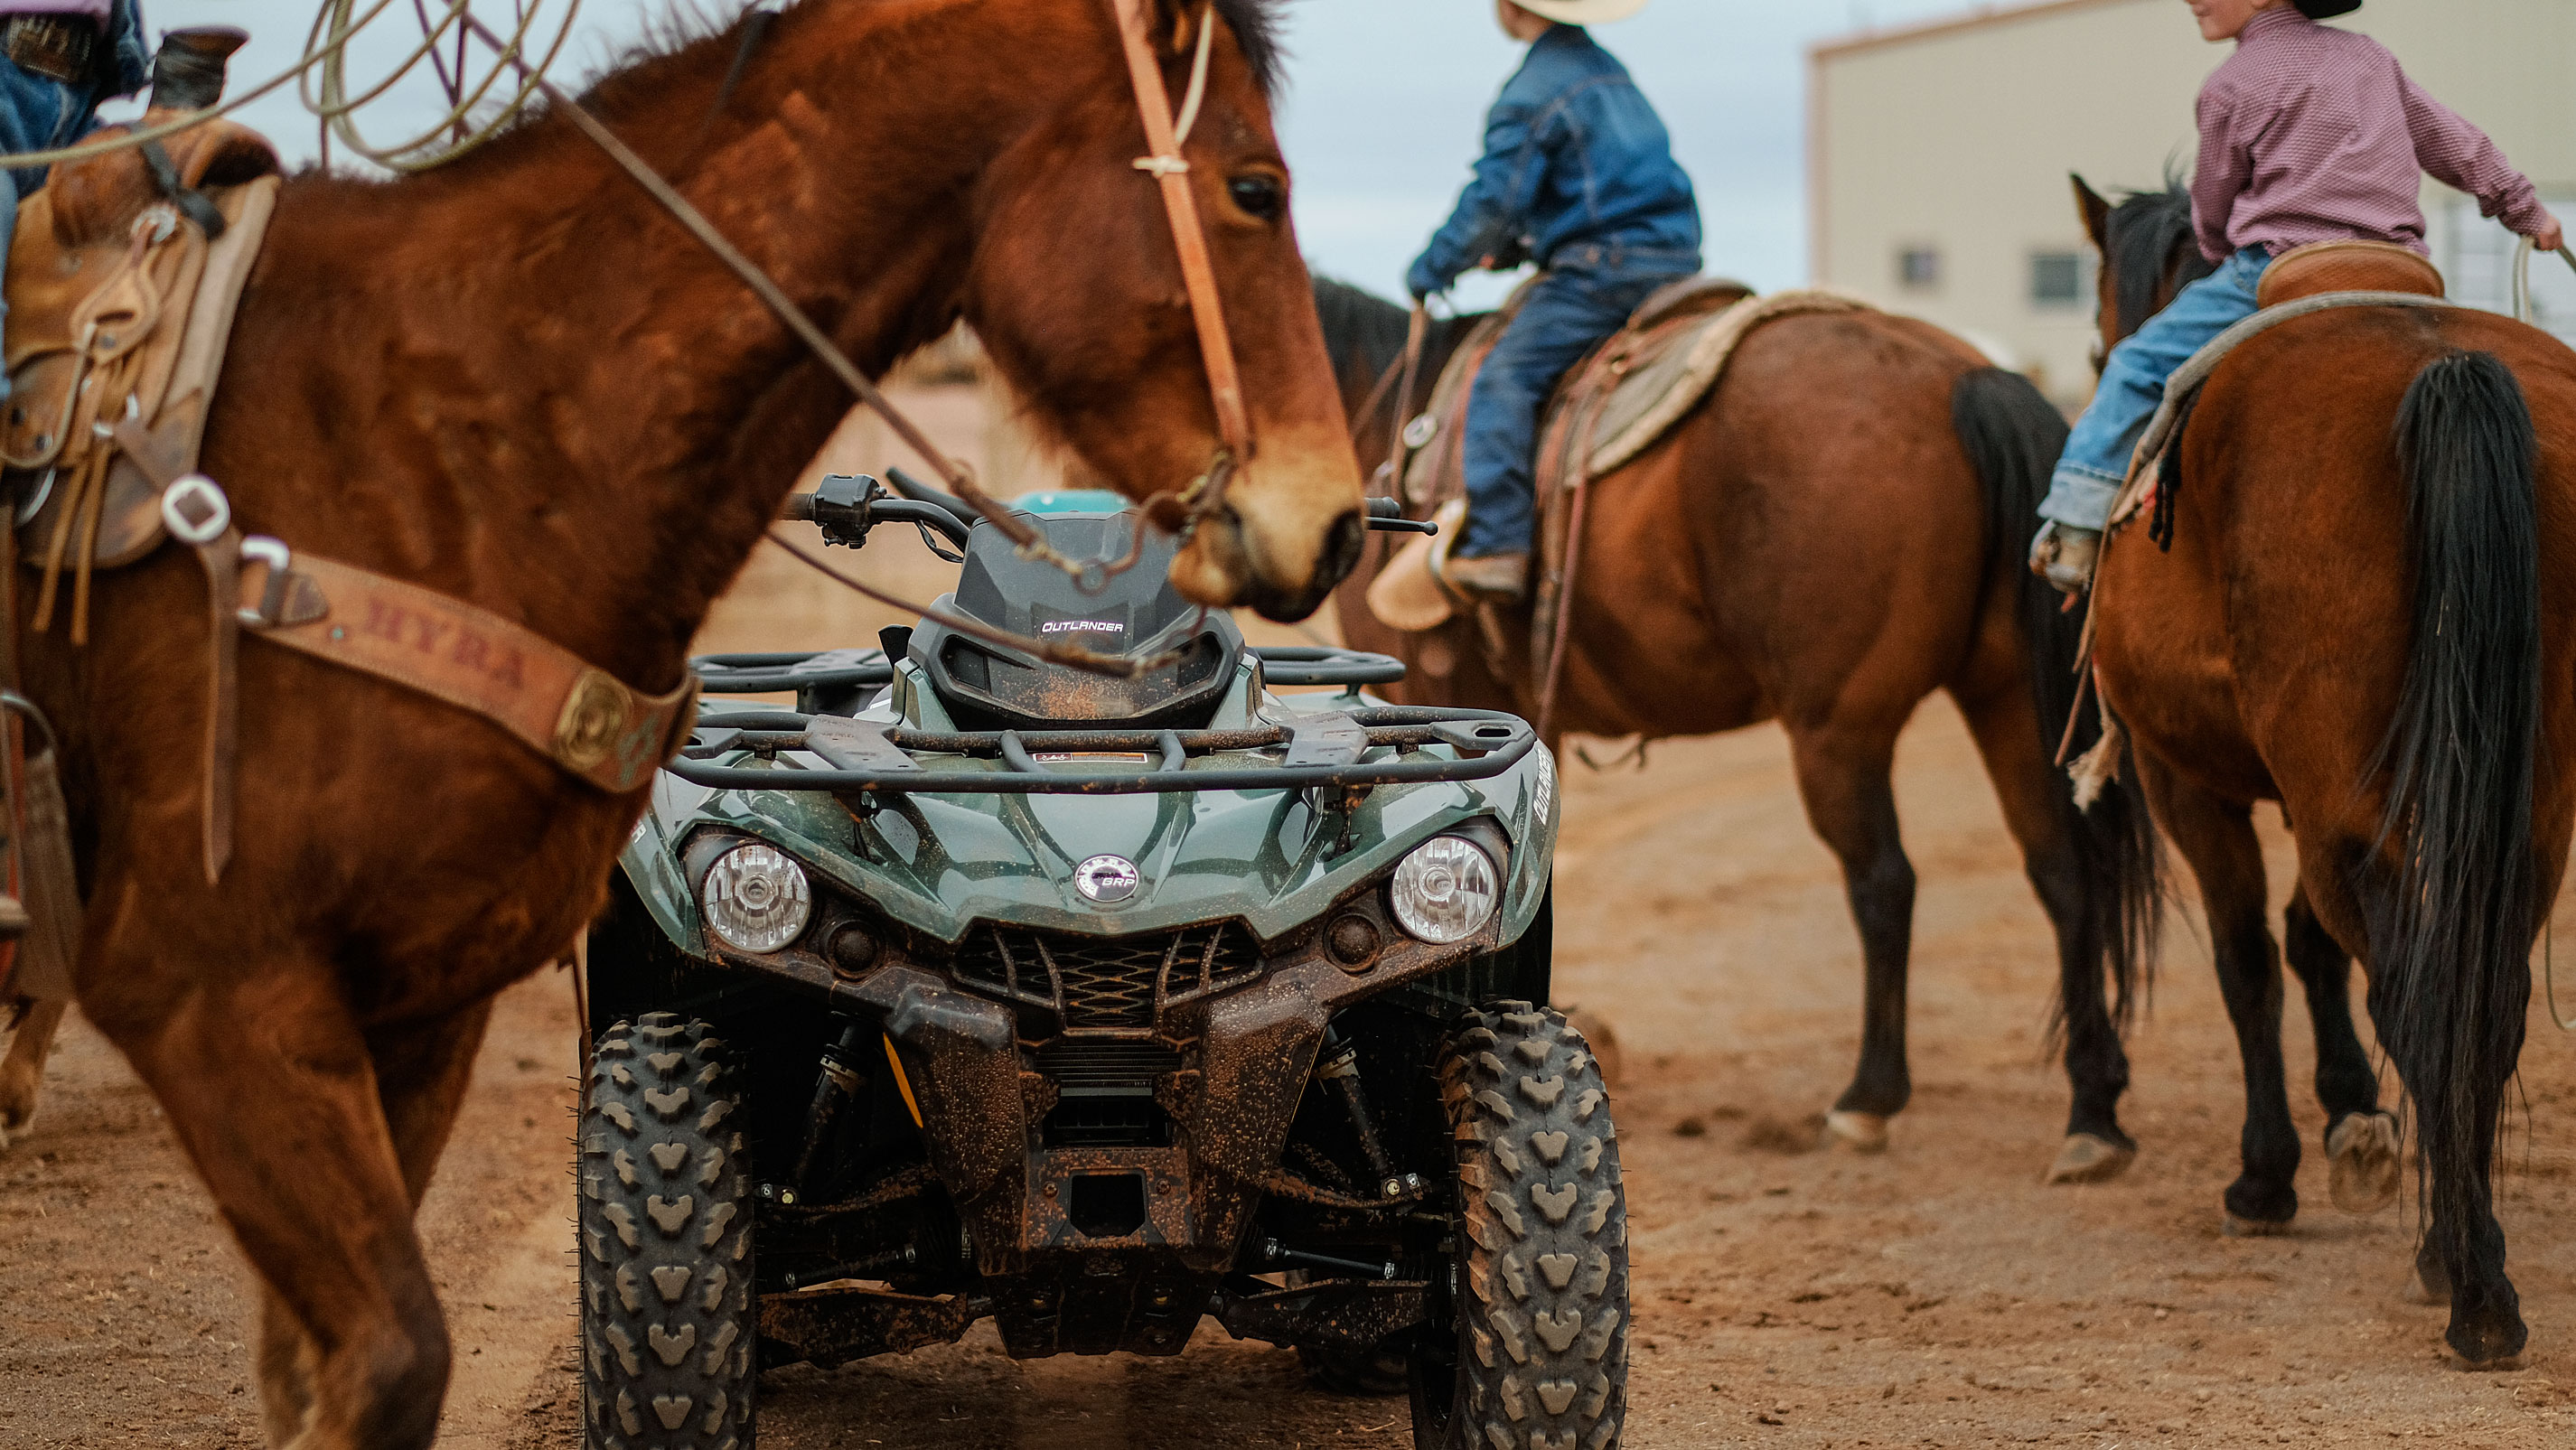 The front of a Can-Am ATV on a ranch